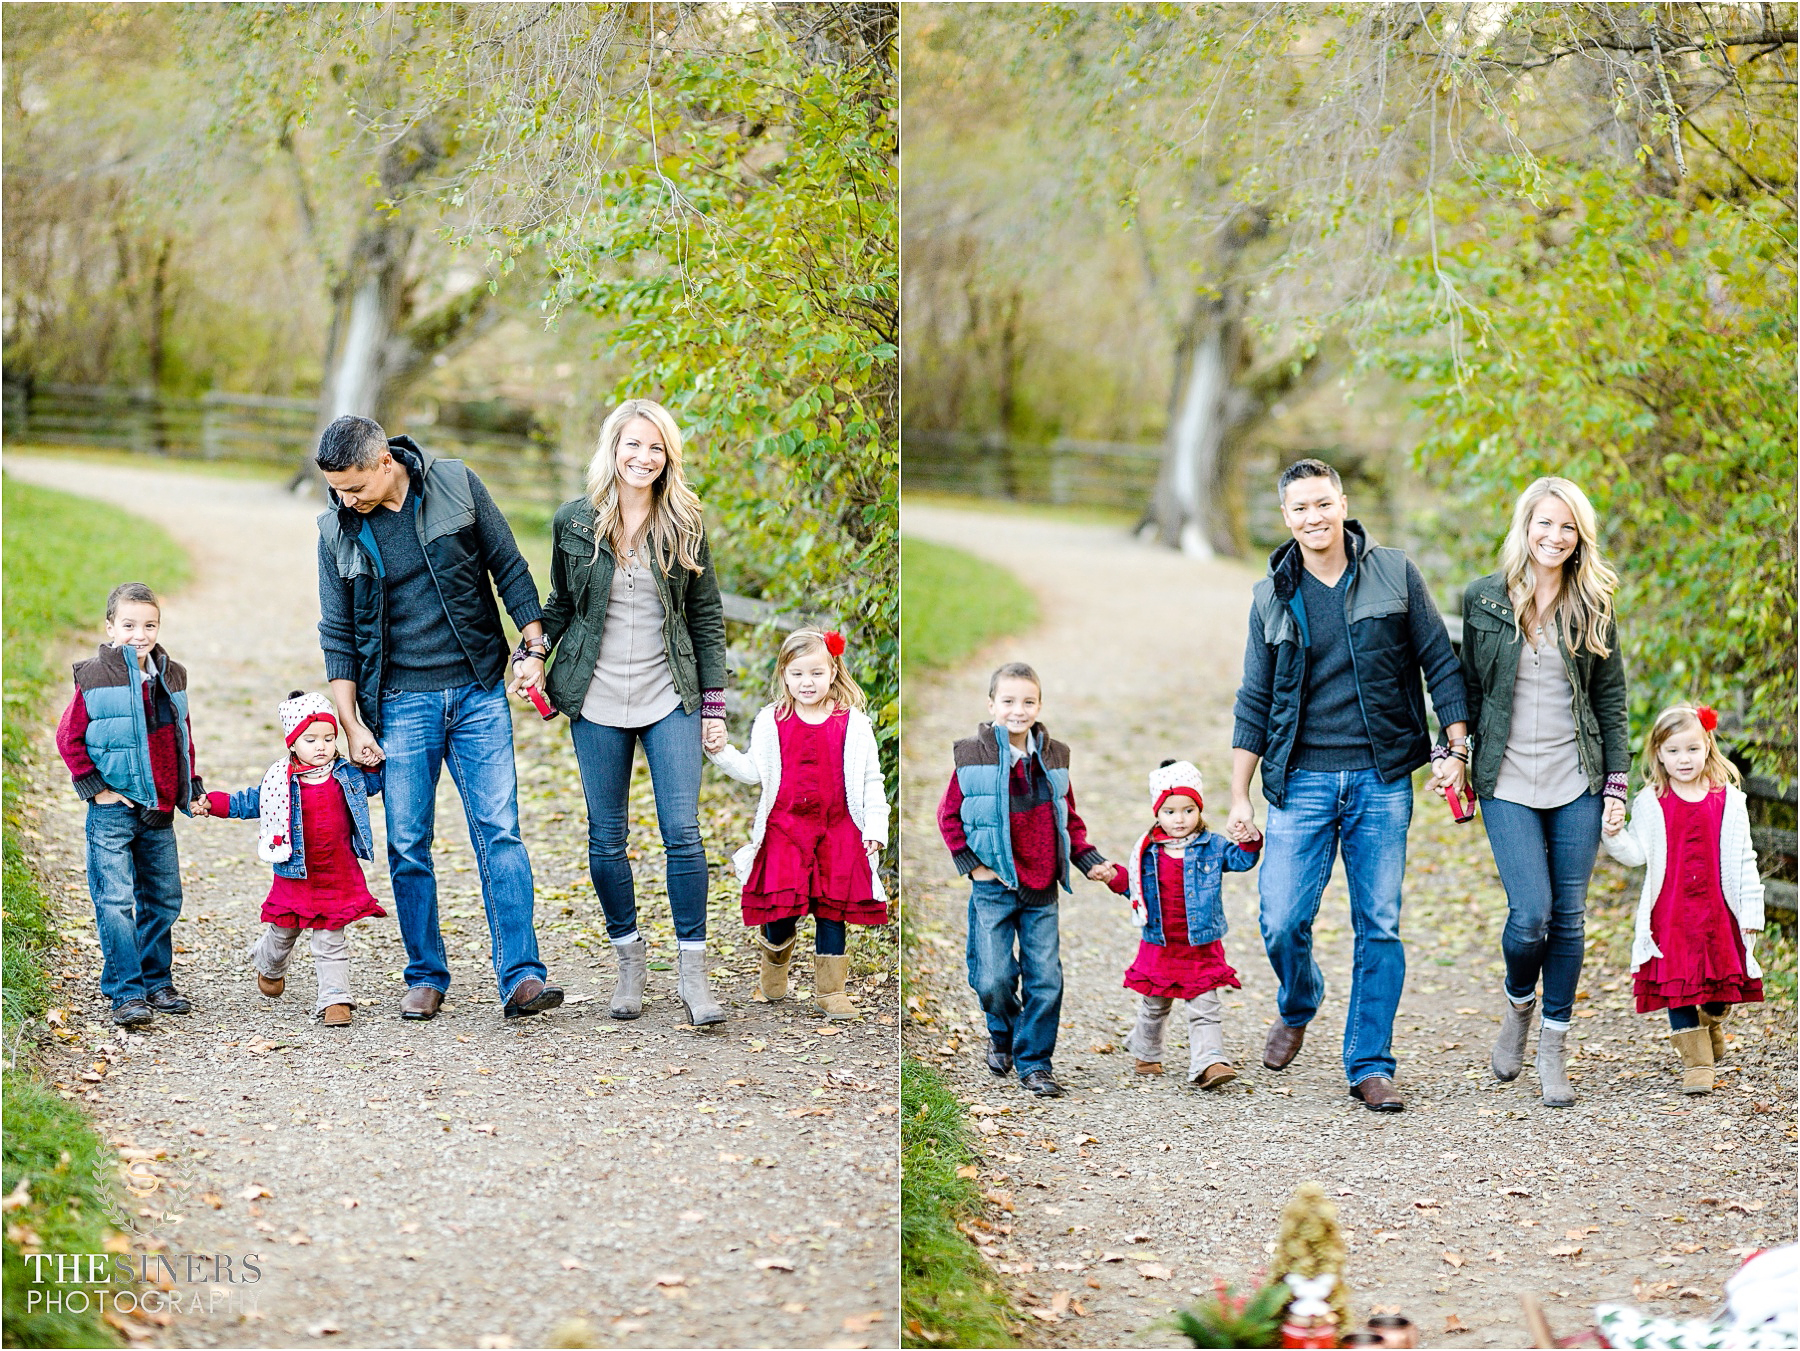 Williams Family_Indianapolis Family Photographer_TheSinersPhotography_0011